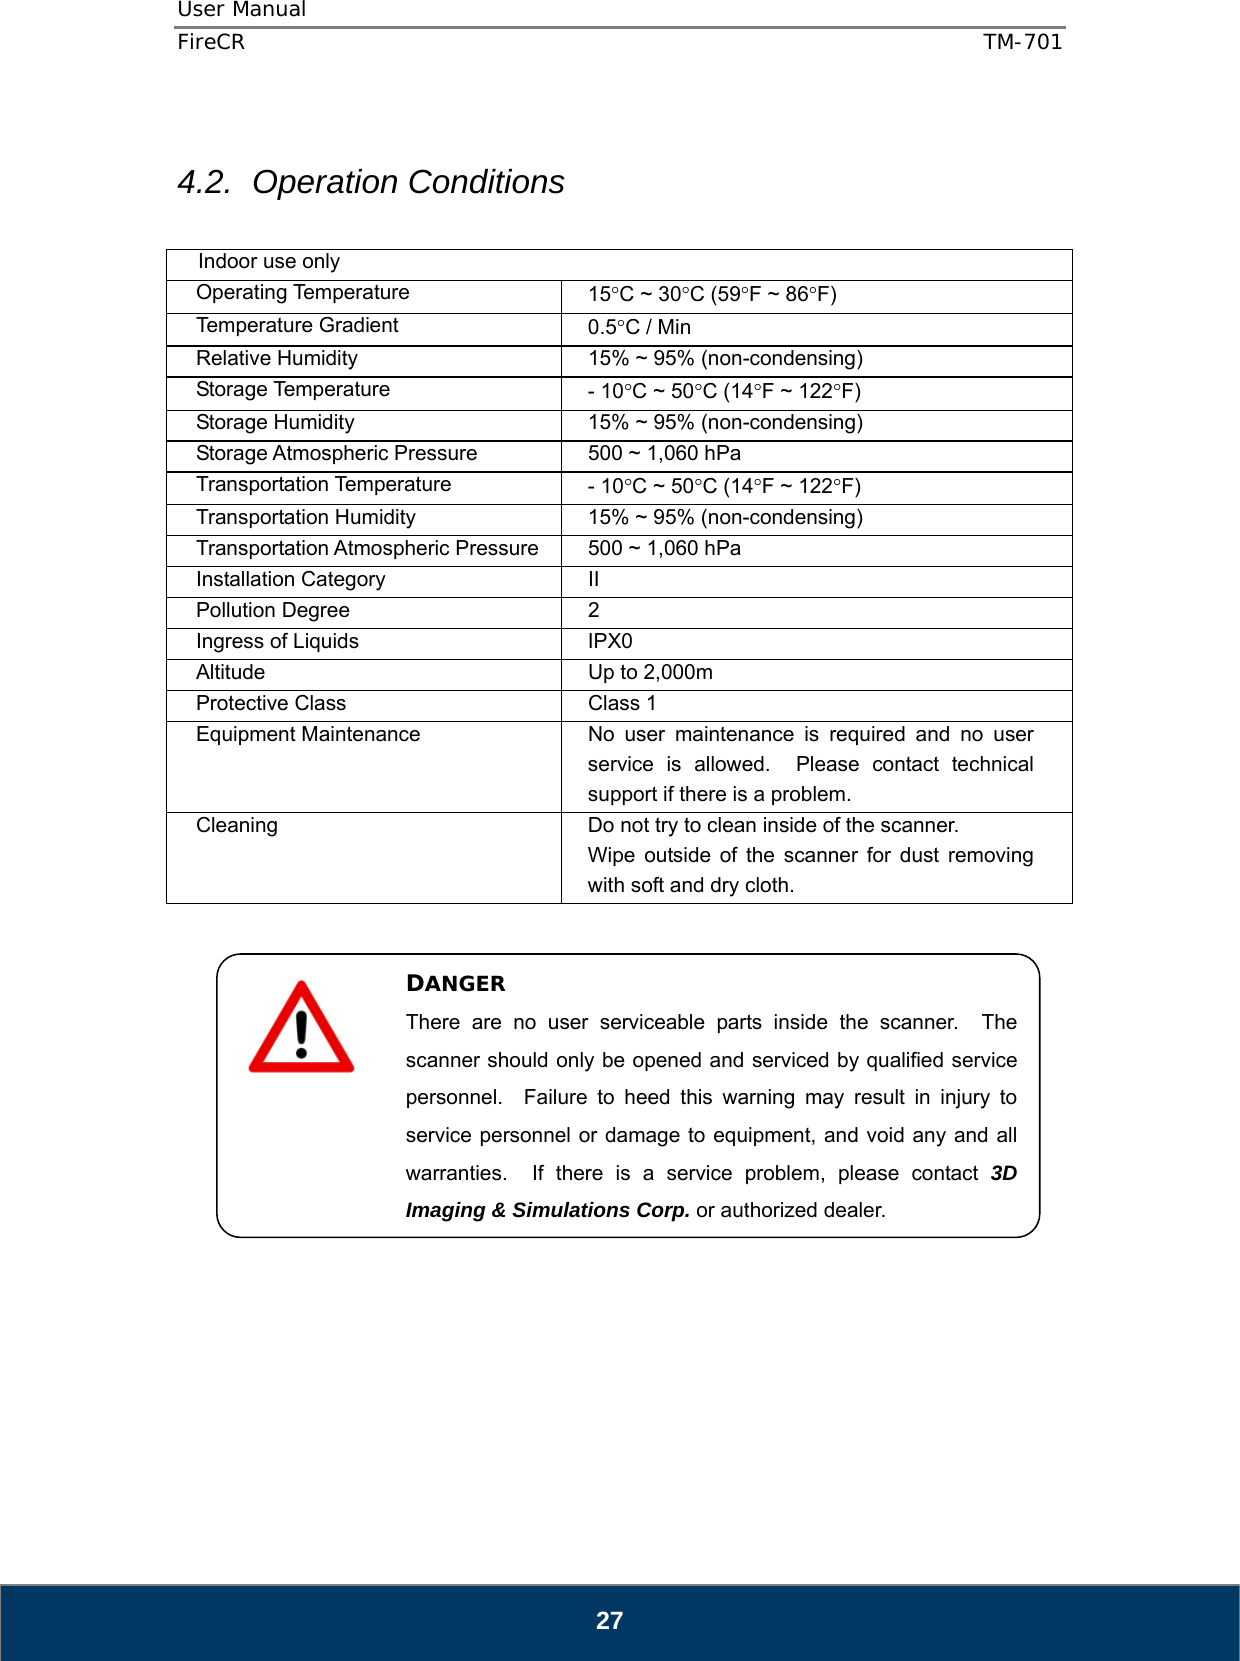 User Manual  FireCR  TM-701   27  4.2. Operation Conditions  Indoor use only Operating Temperature  15C ~ 30C (59F ~ 86F) Temperature Gradient  0.5C / Min Relative Humidity  15% ~ 95% (non-condensing) Storage Temperature  - 10C ~ 50C (14F ~ 122F) Storage Humidity  15% ~ 95% (non-condensing) Storage Atmospheric Pressure  500 ~ 1,060 hPa Transportation Temperature  - 10C ~ 50C (14F ~ 122F) Transportation Humidity  15% ~ 95% (non-condensing) Transportation Atmospheric Pressure  500 ~ 1,060 hPa Installation Category  II Pollution Degree  2 Ingress of Liquids  IPX0 Altitude  Up to 2,000m Protective Class  Class 1 Equipment Maintenance  No user maintenance is required and no user service is allowed.  Please contact technical support if there is a problem. Cleaning  Do not try to clean inside of the scanner. Wipe outside of the scanner for dust removing with soft and dry cloth.                    DANGER There are no user serviceable parts inside the scanner.  The scanner should only be opened and serviced by qualified service personnel.  Failure to heed this warning may result in injury to service personnel or damage to equipment, and void any and all warranties.  If there is a service problem, please contact 3D Imaging &amp; Simulations Corp. or authorized dealer. 